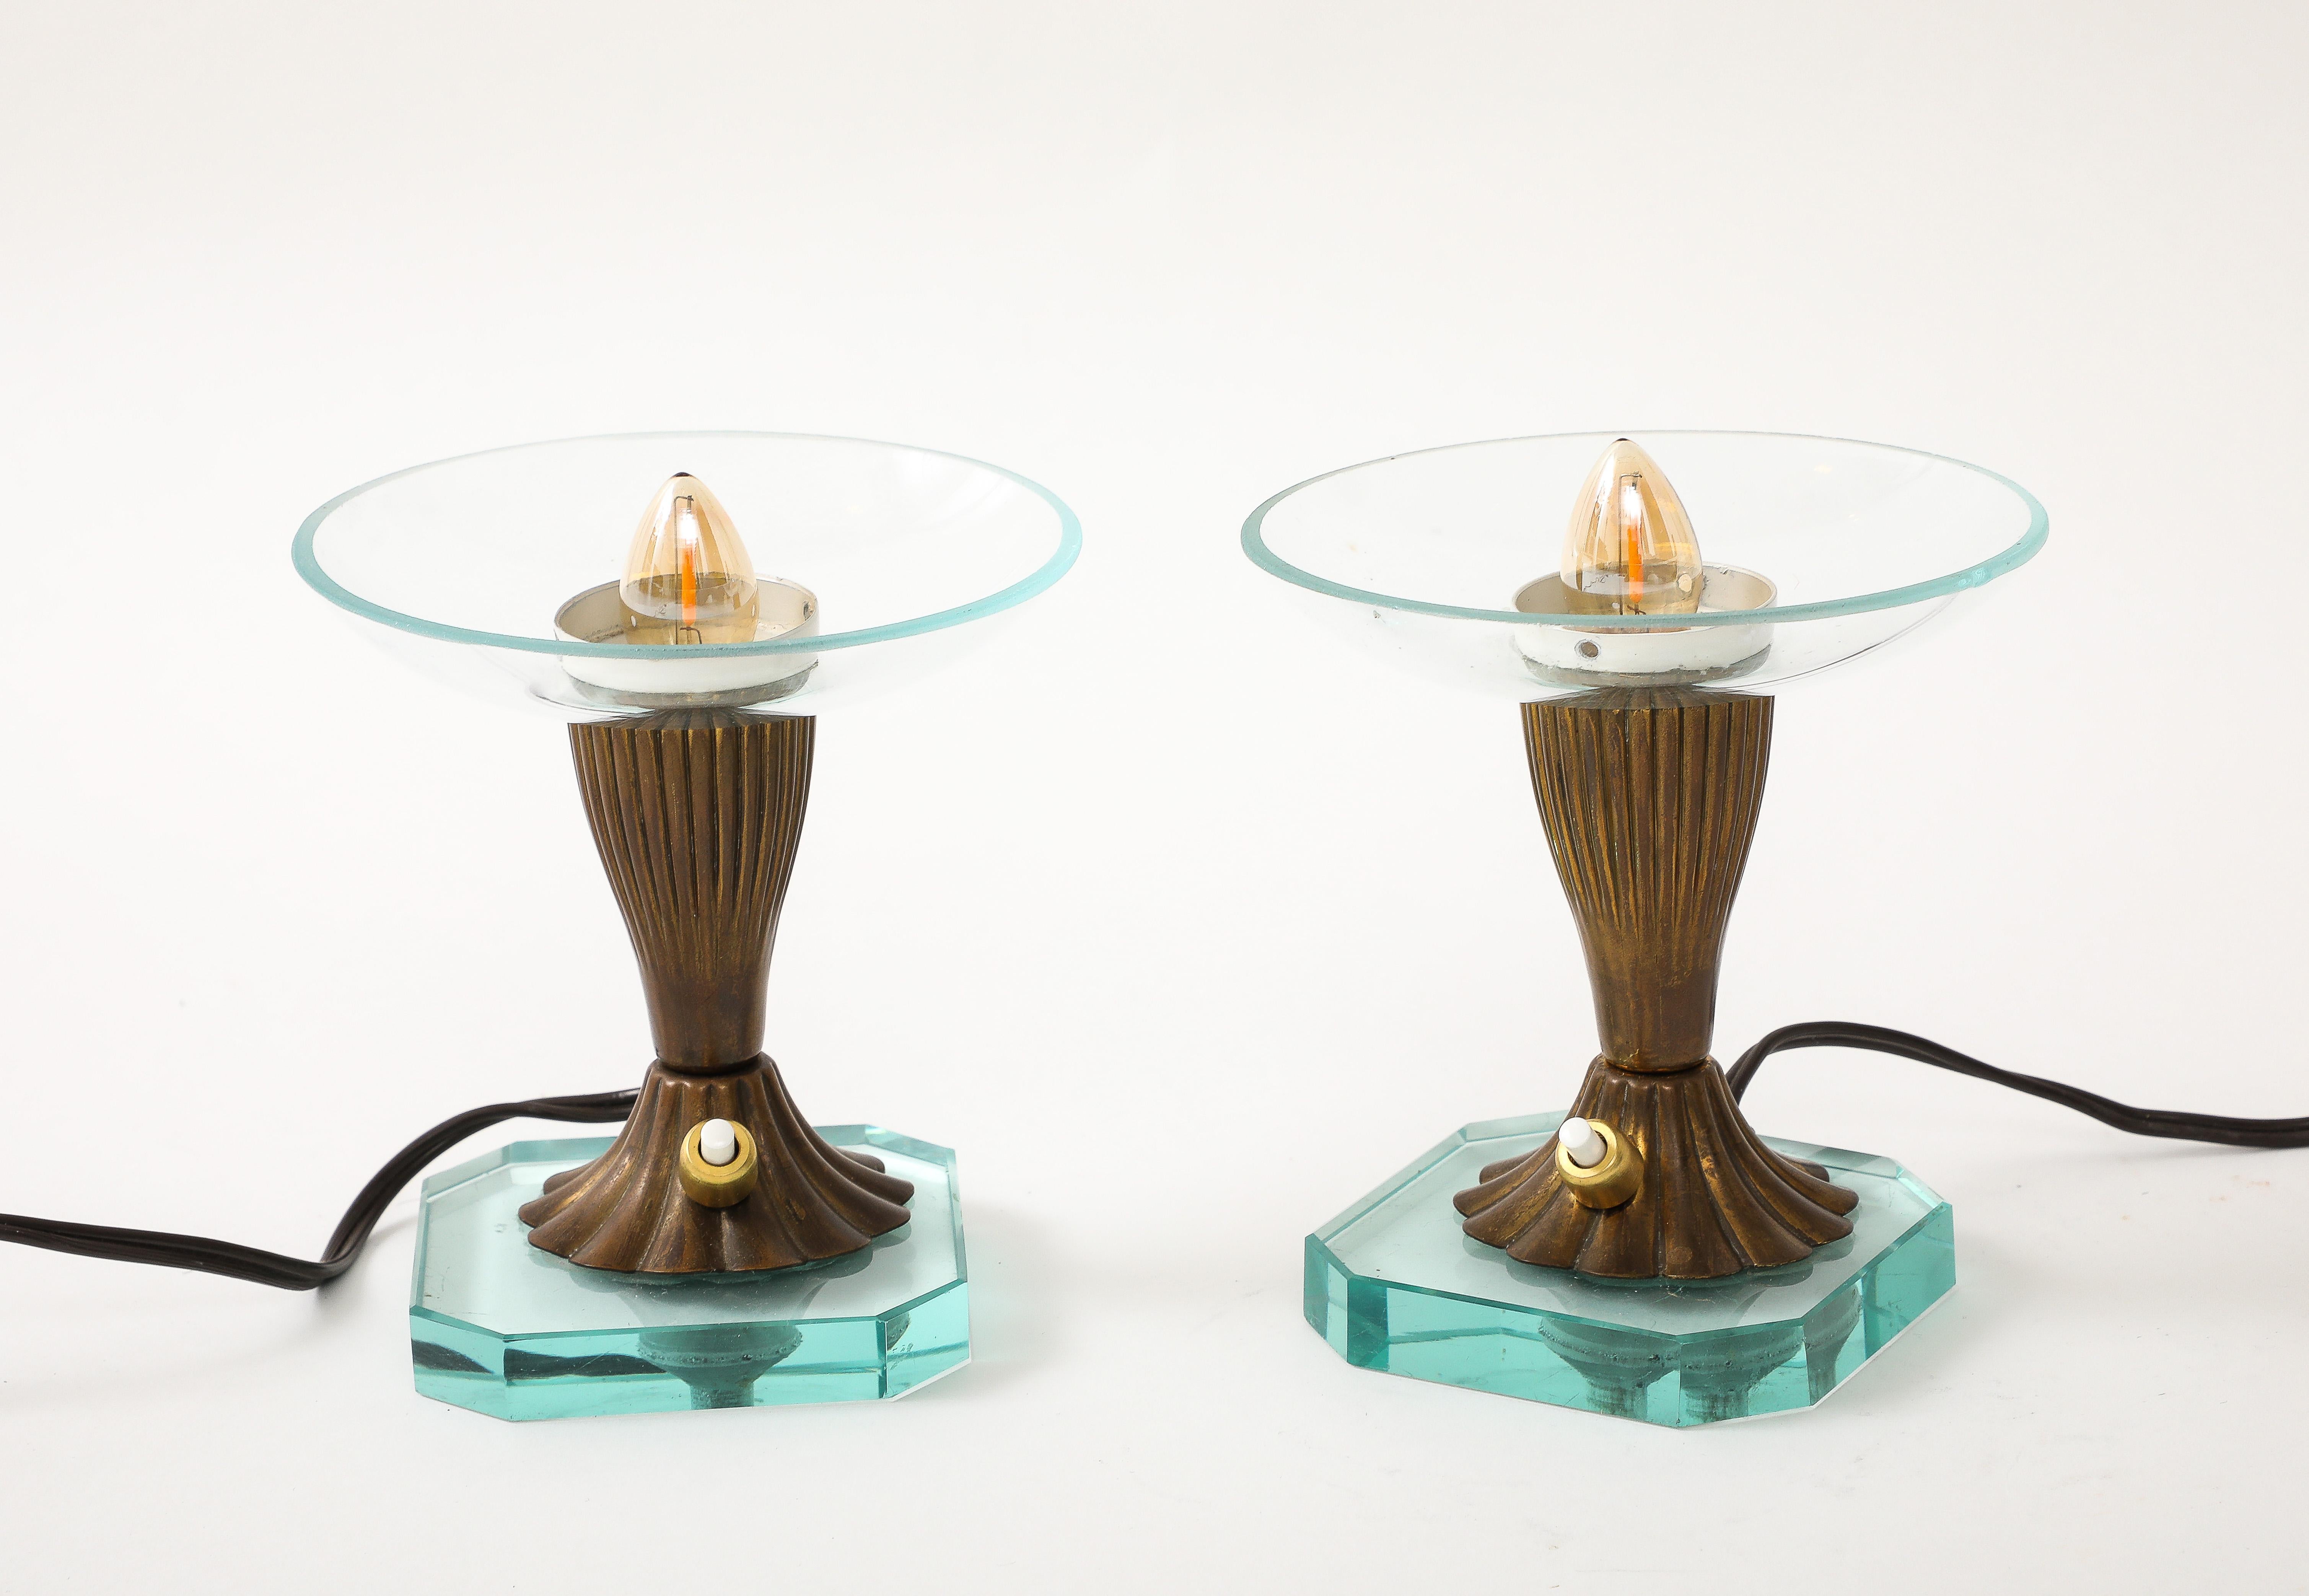 Mid-20th Century Pair of Glass & Brass Petite Table Lamps att. Pietro Chiesa - Italy 1940's For Sale